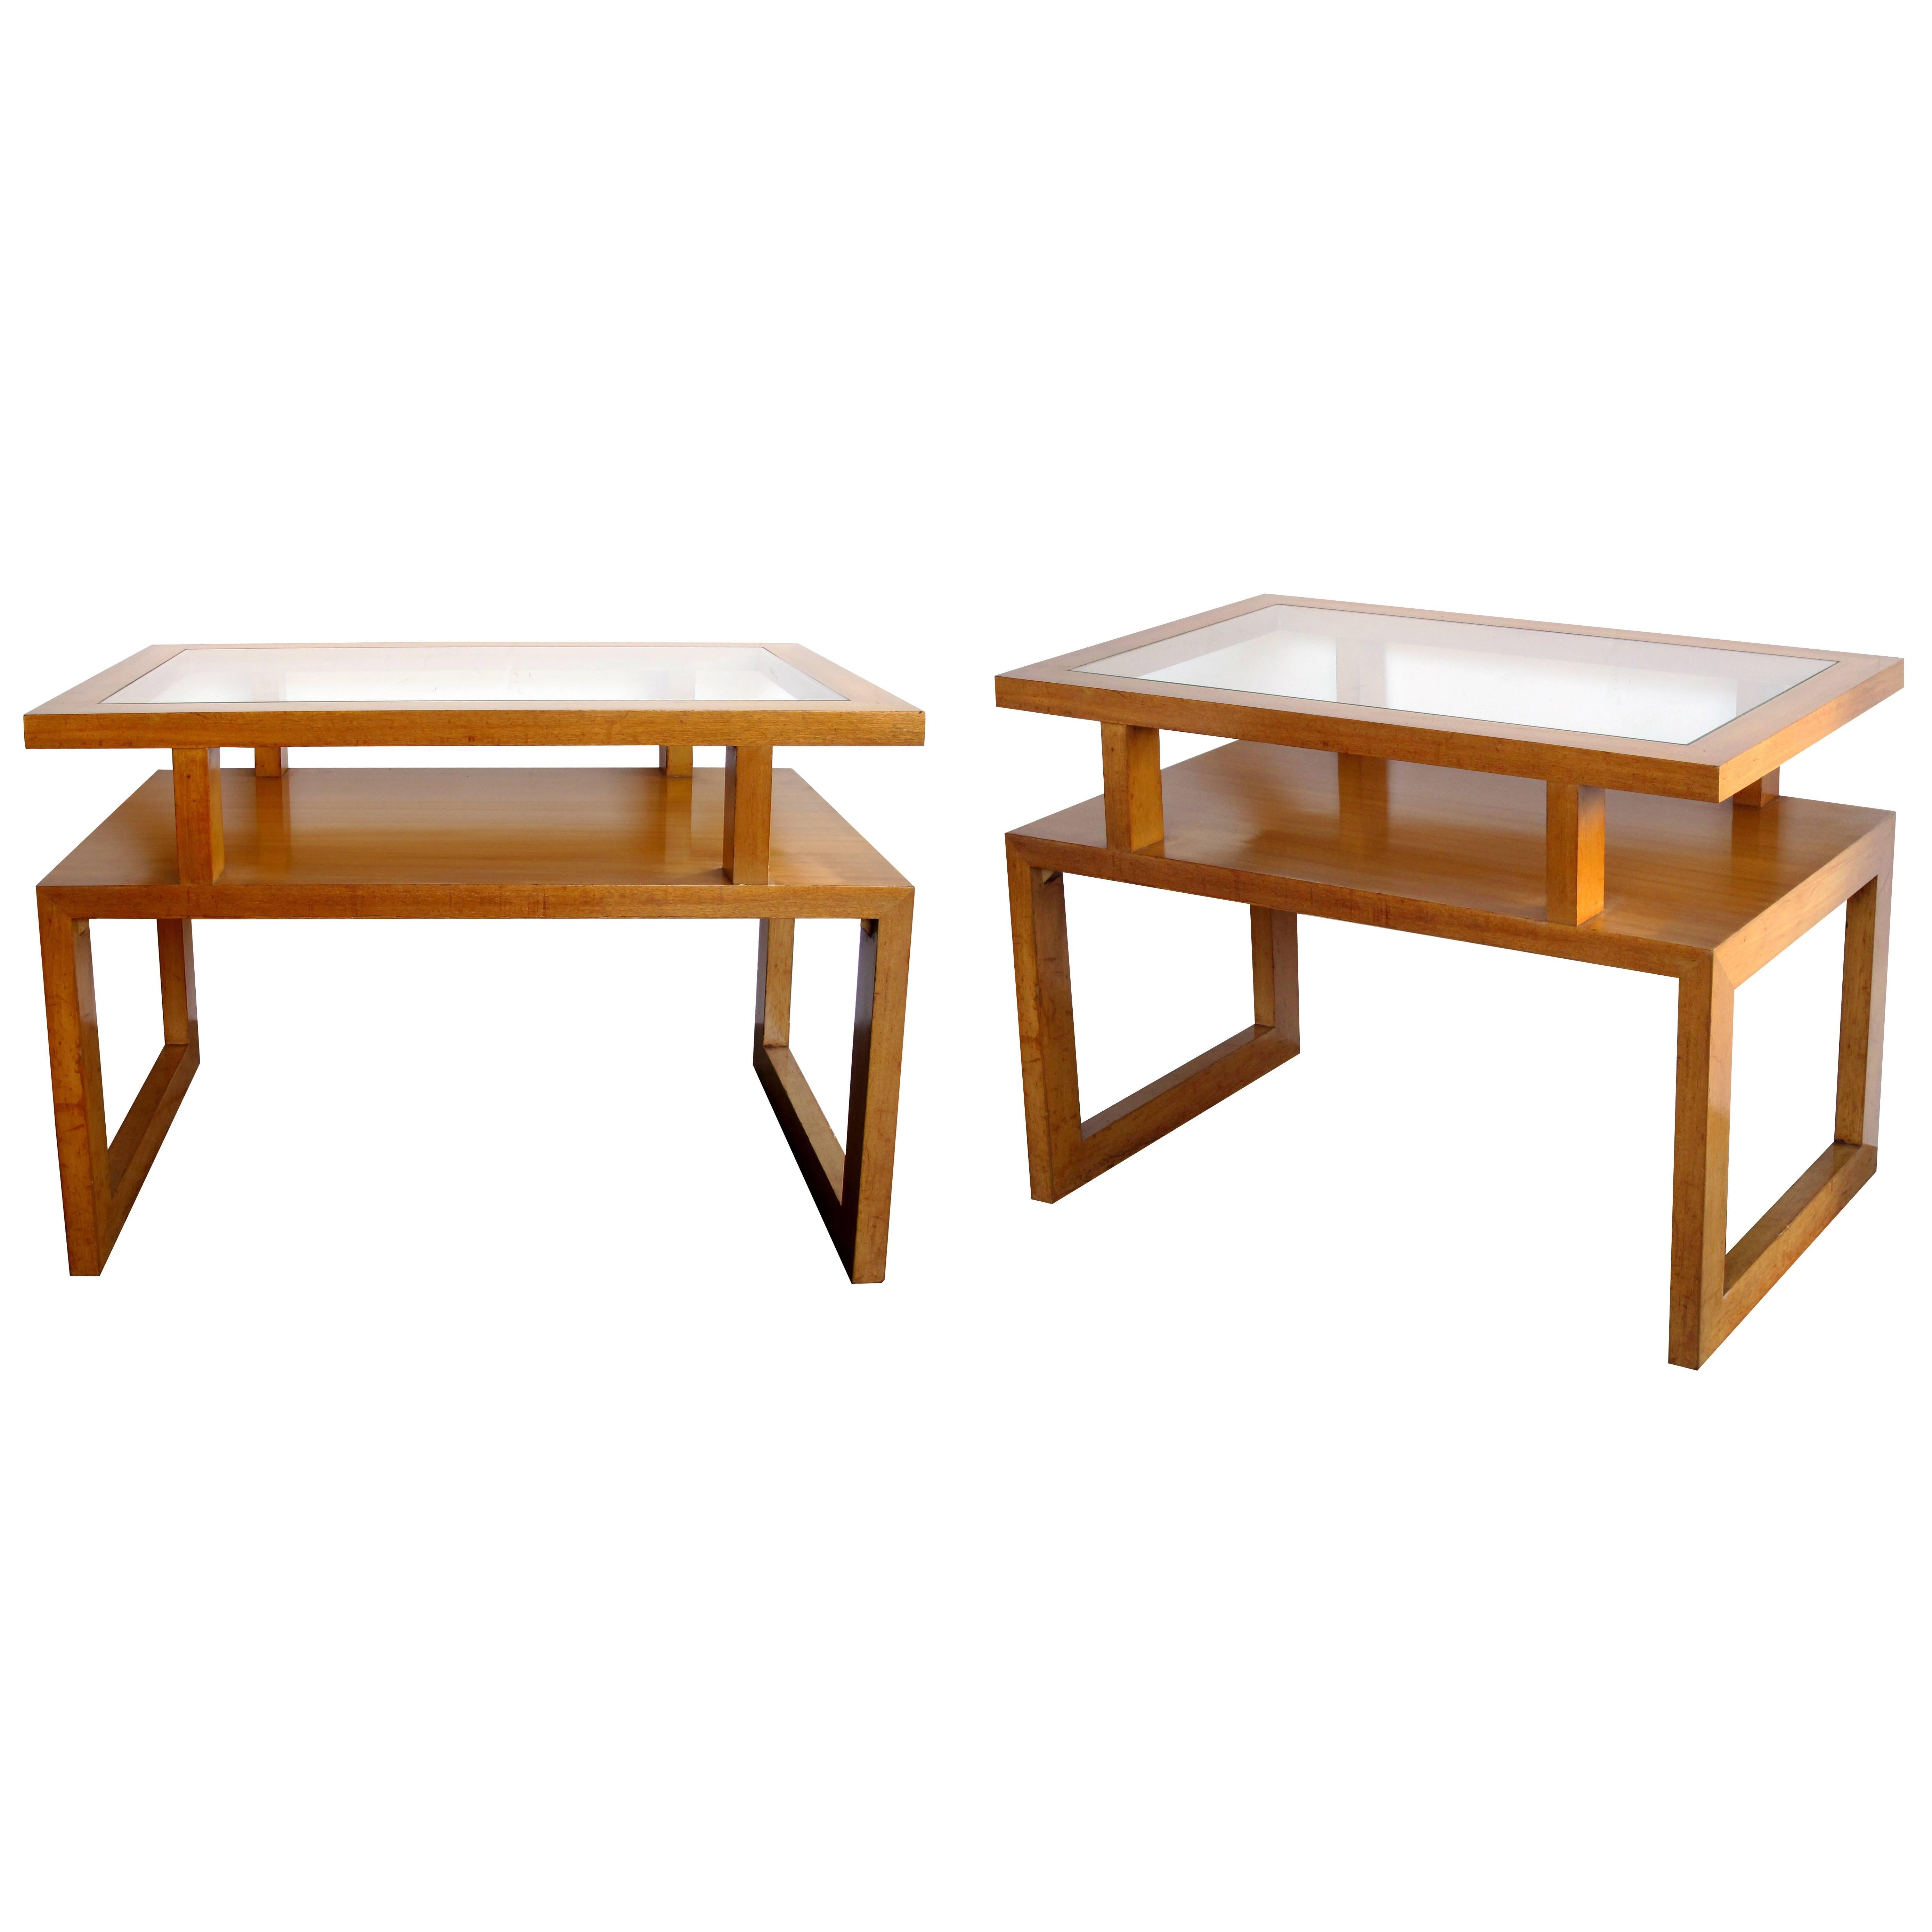 Pair of American 1950s Maple-Wood Rectangular End, Side Tables, Glass Tops